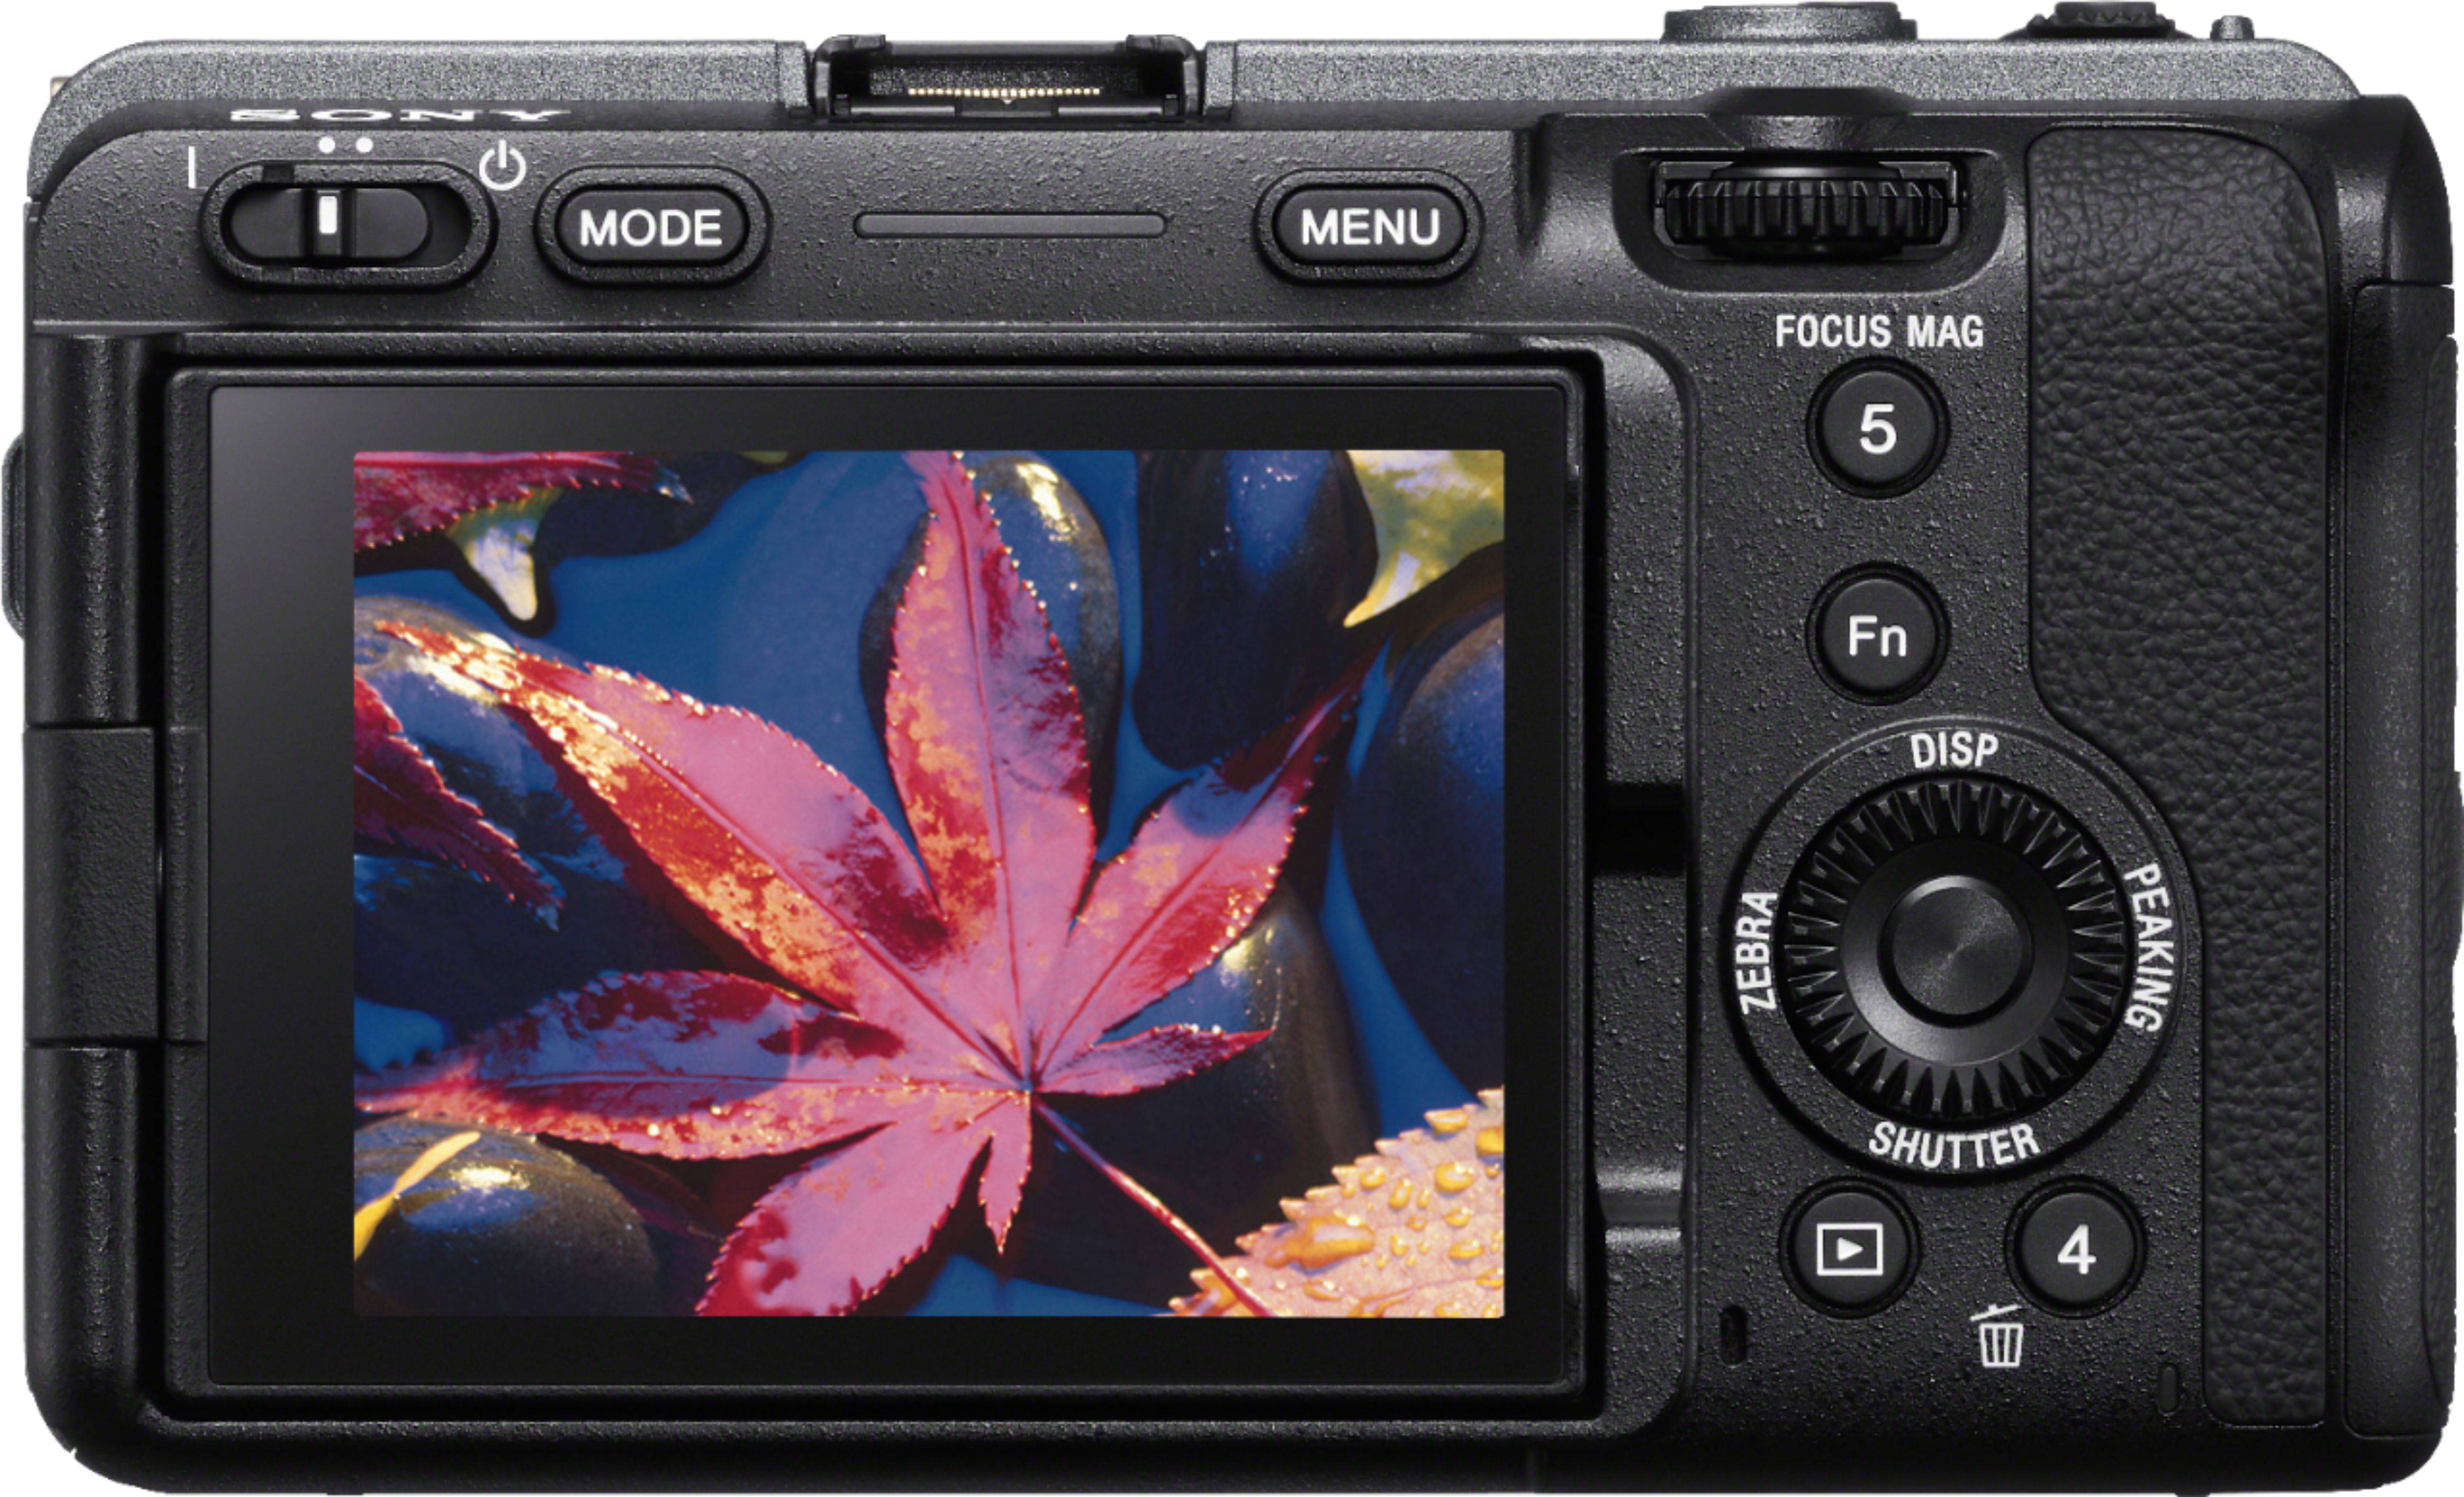 Sony adds compact full-frame FX3 to Cinema Line: Digital Photography Review